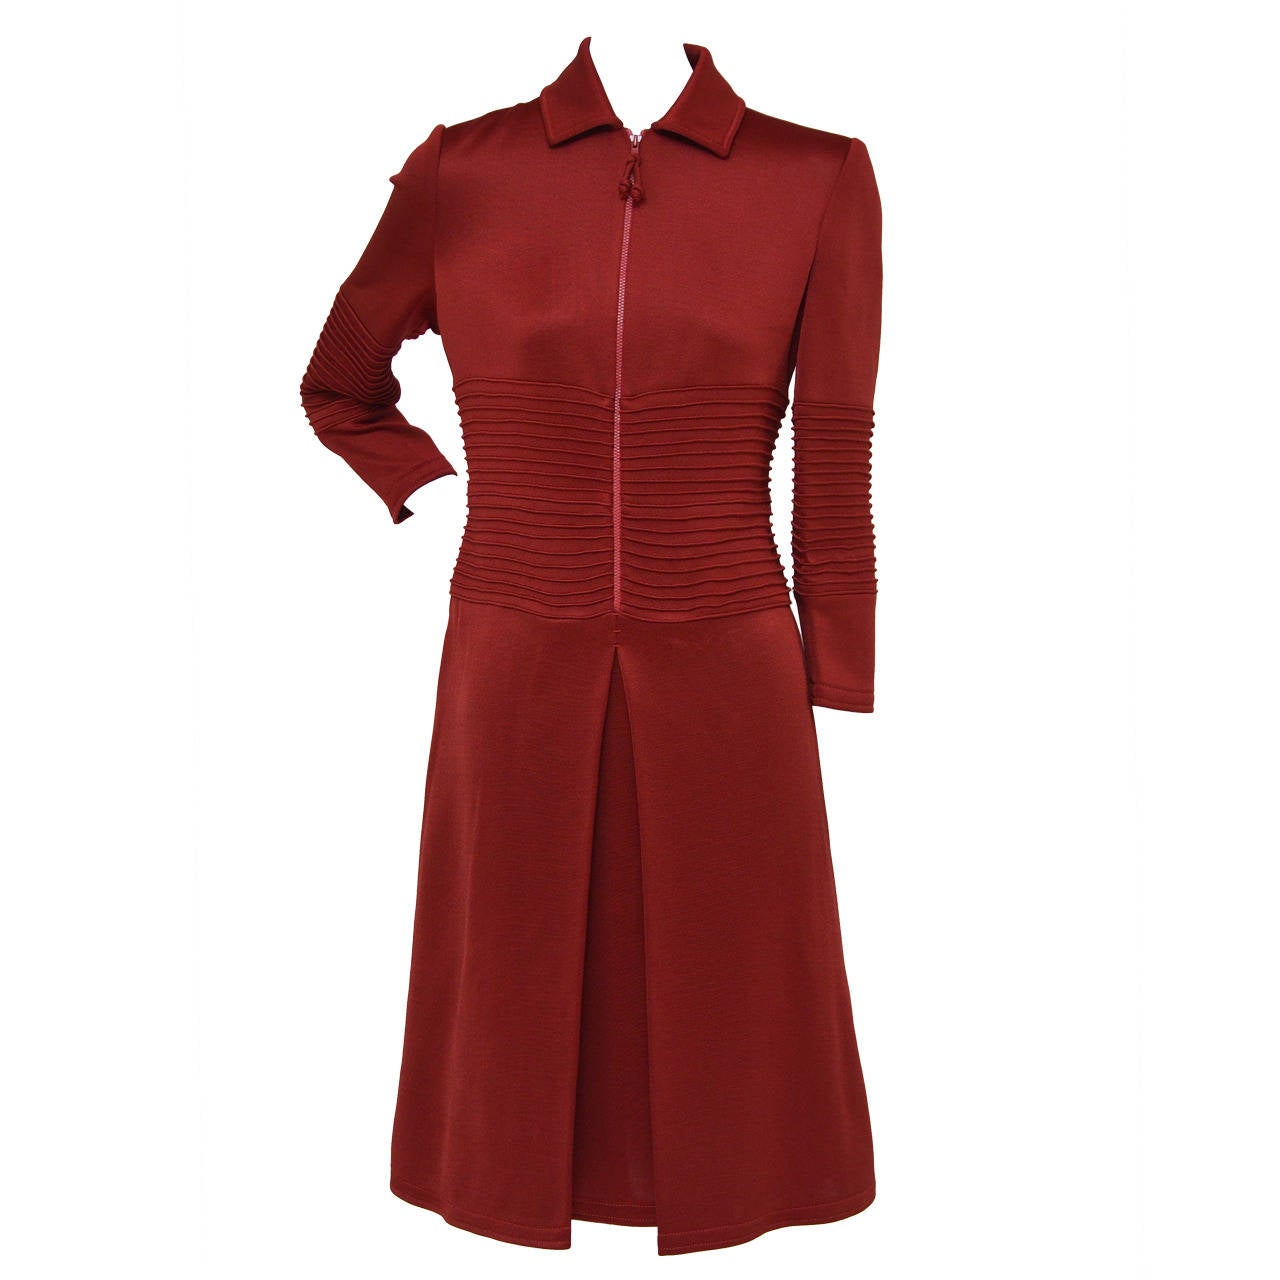 Chado Ralph Rucci  "Red  Lipstick" Zip-front Ponte Dress, Fall 2011    For Sale